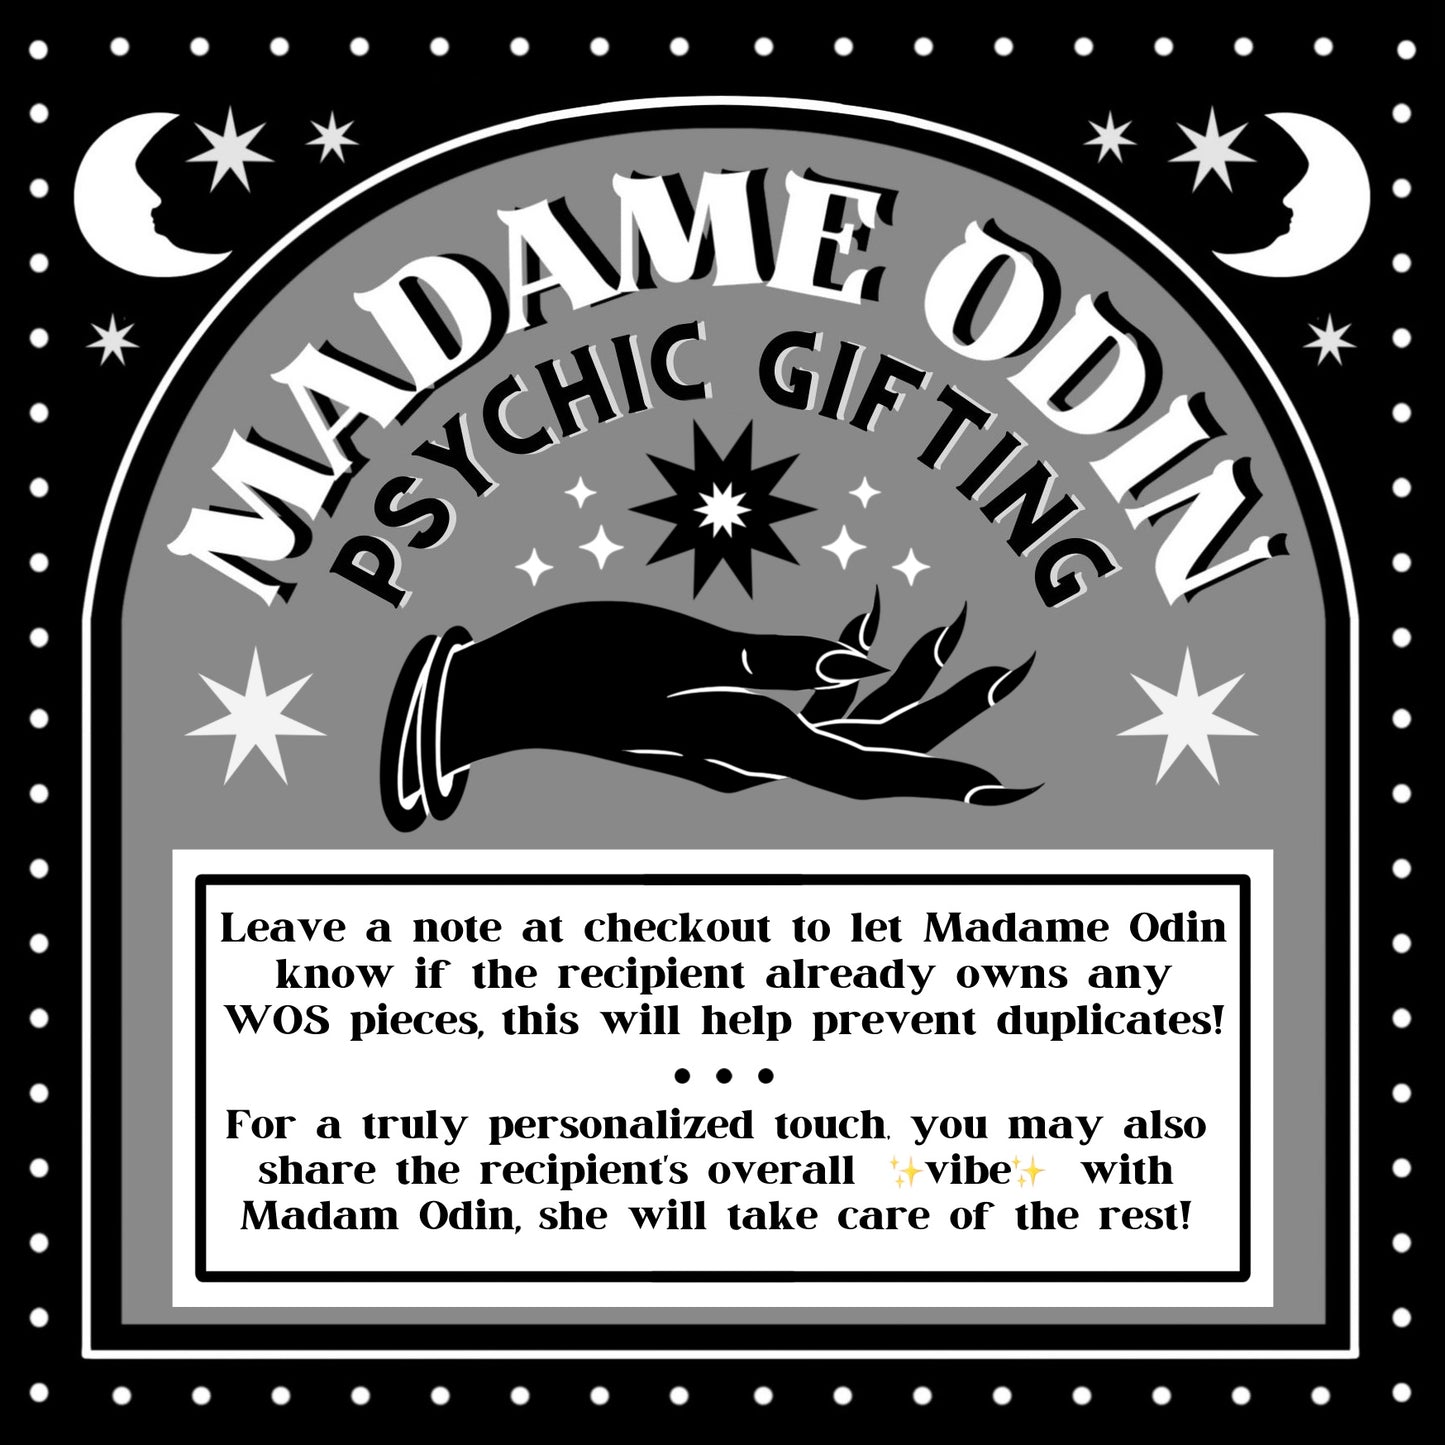 Madame Odin's Psychic Gifting Service